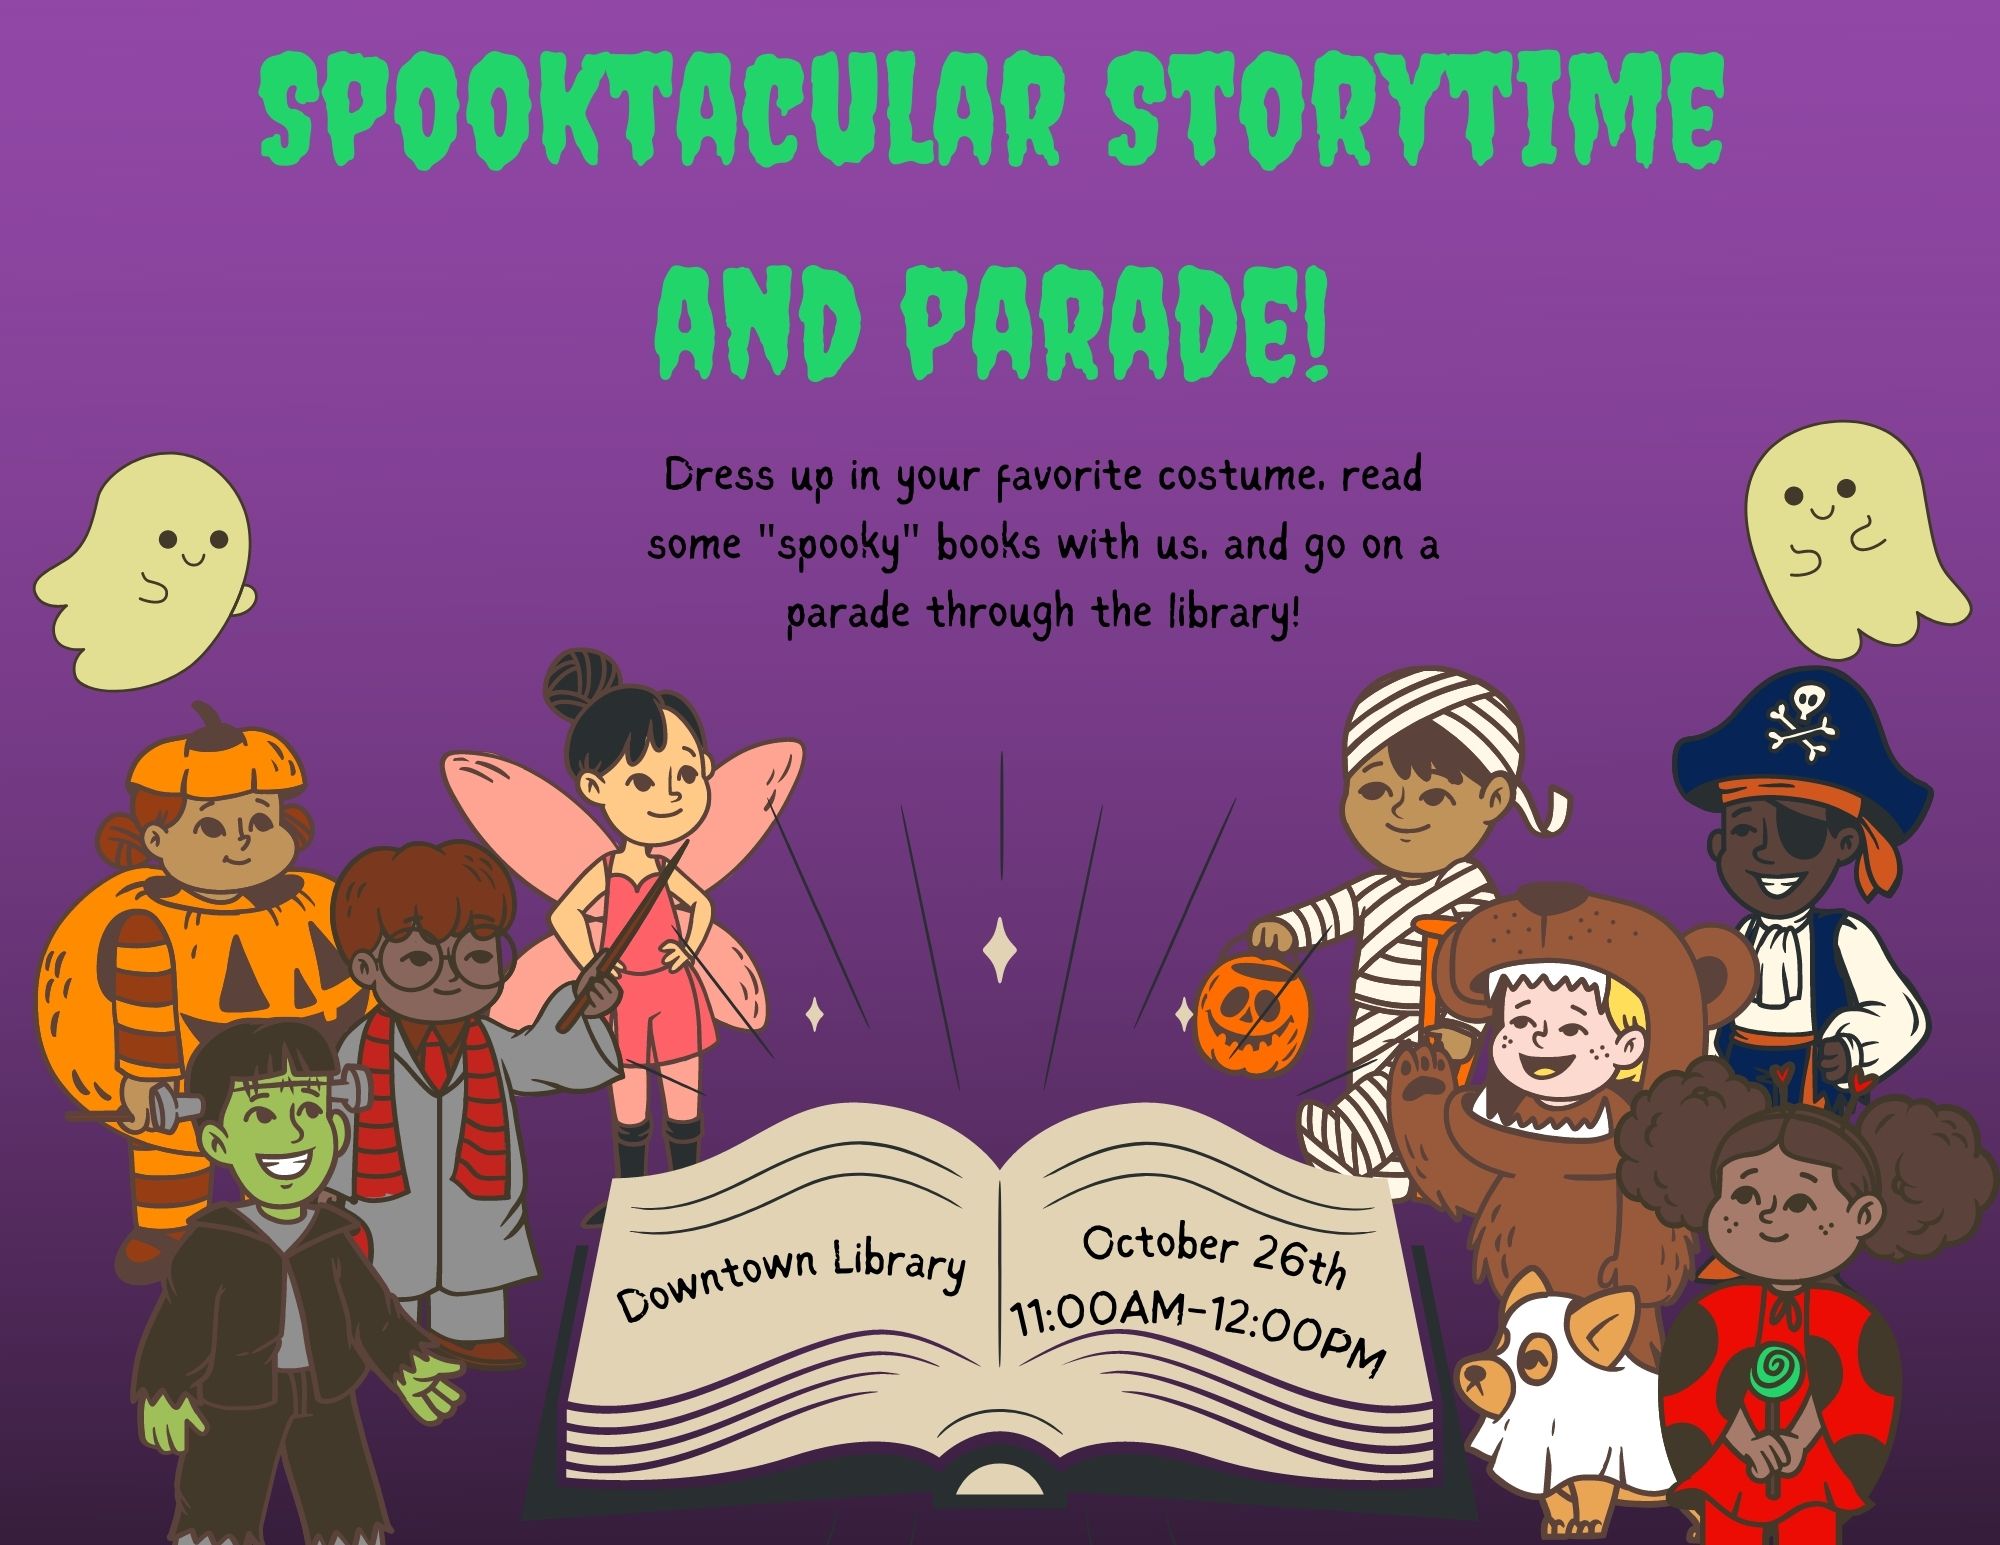 Spooktacular Storytime and Parade